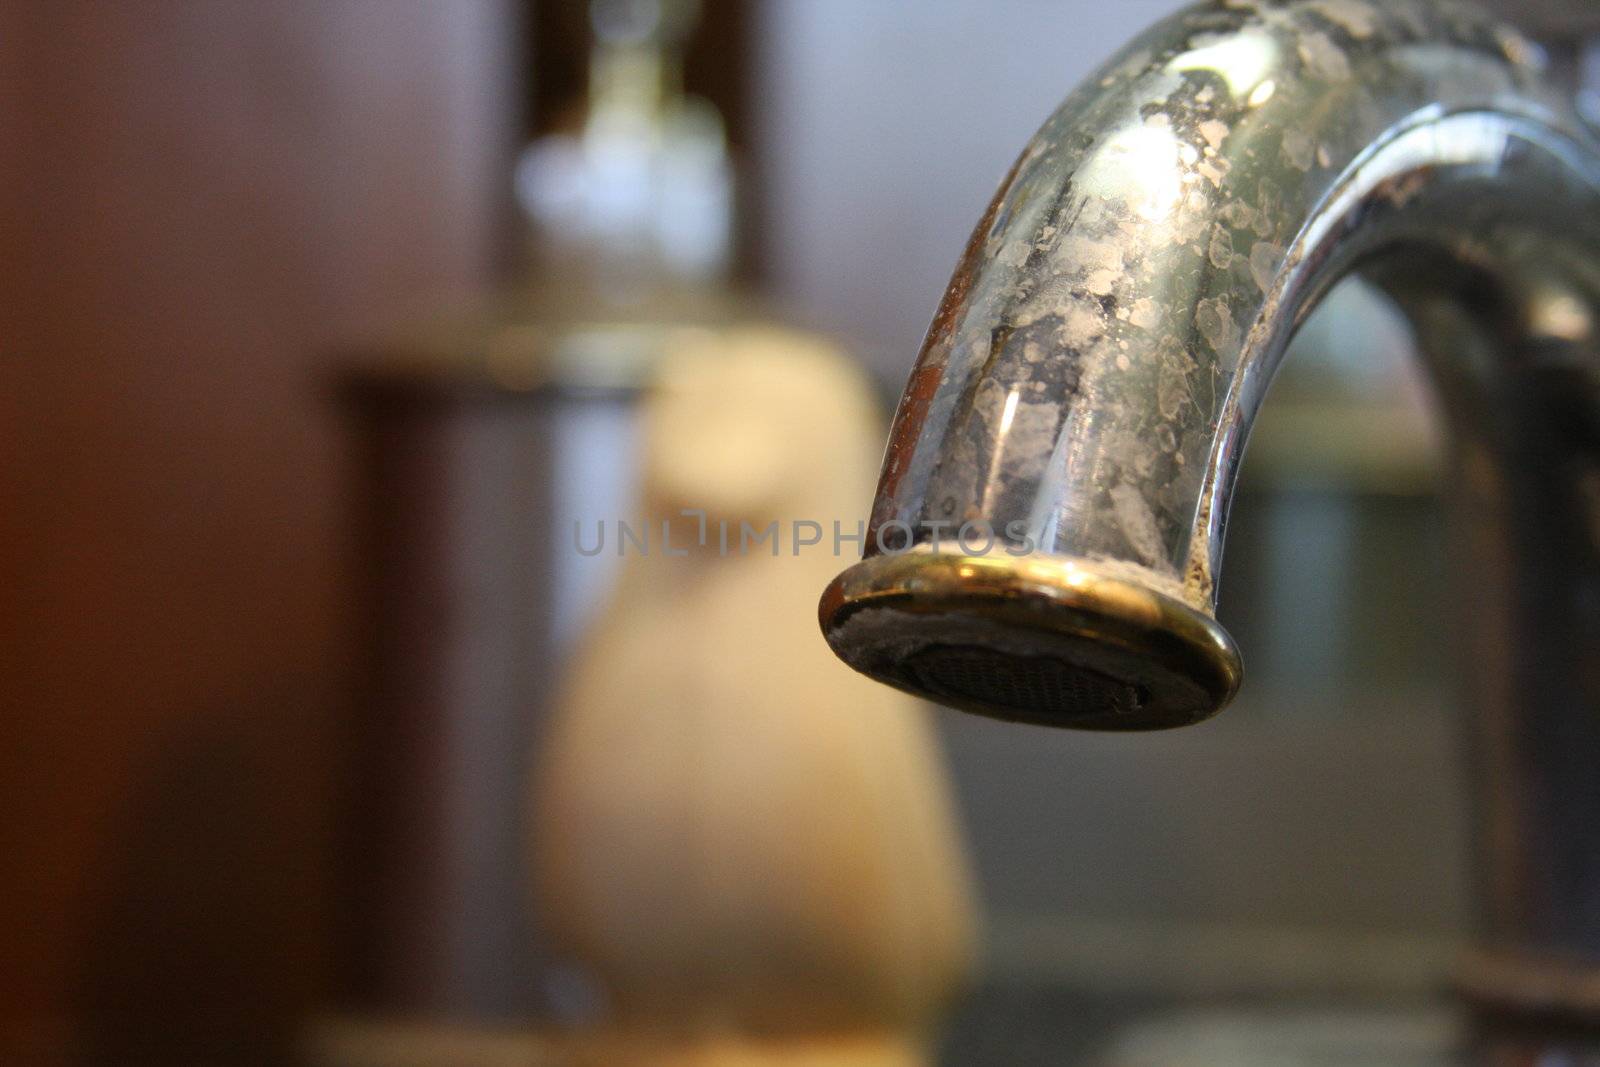 Focus on the end of a water-stained steel sink faucet with gold trim and a bit of mildew. An otherwise in good condition piece of hardware with some regular household grunge. Background shapes include metal soap dispenser and penguin-shaped bar soap.